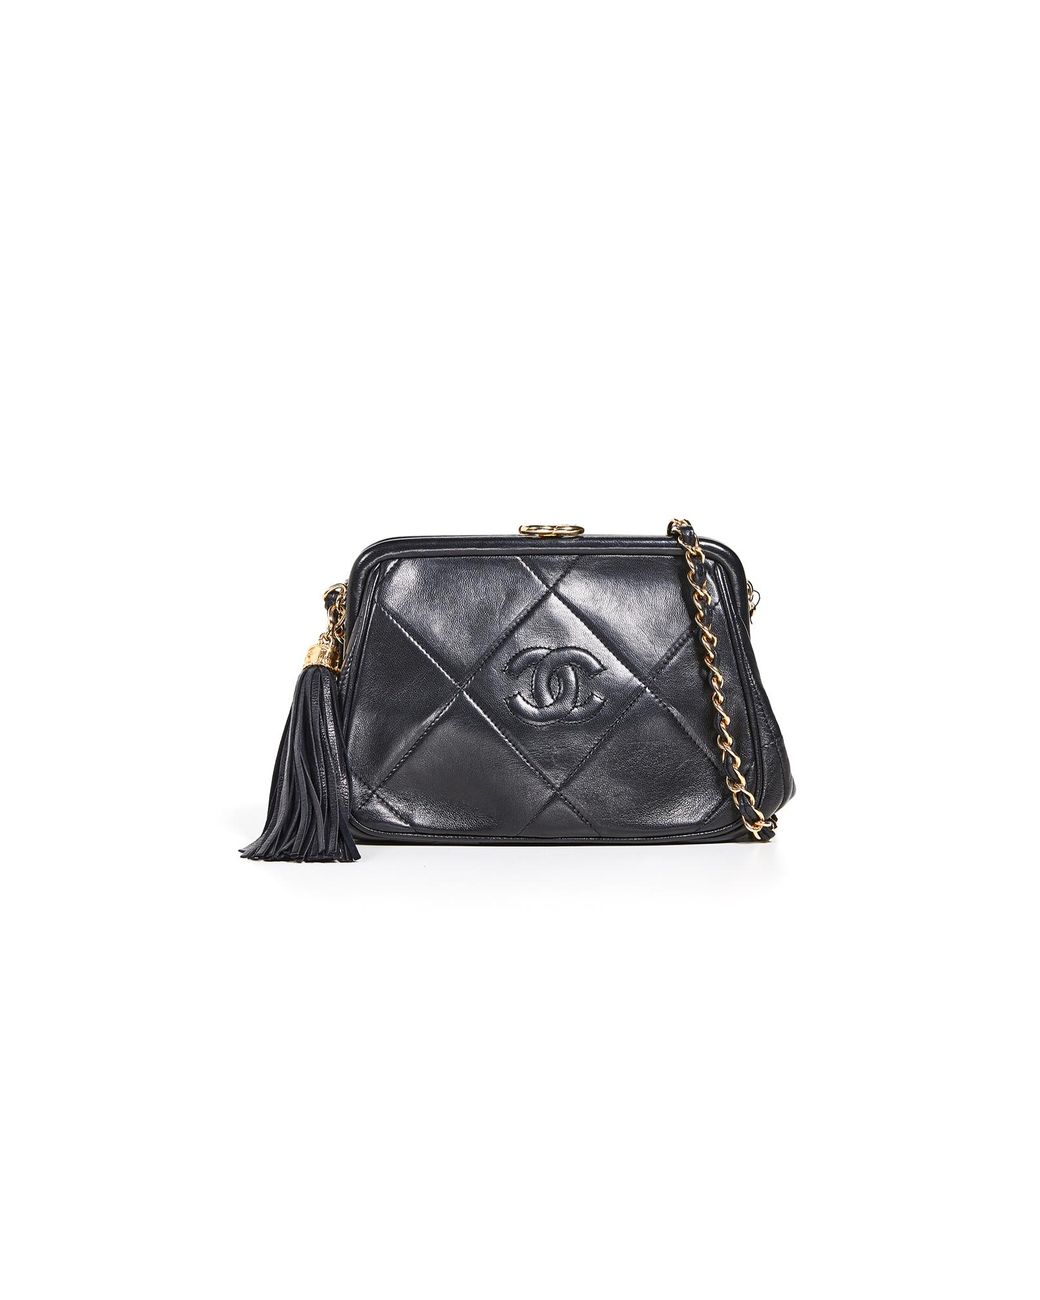 What Goes Around Comes Around Chanel Kiss Lock Mini Bag in